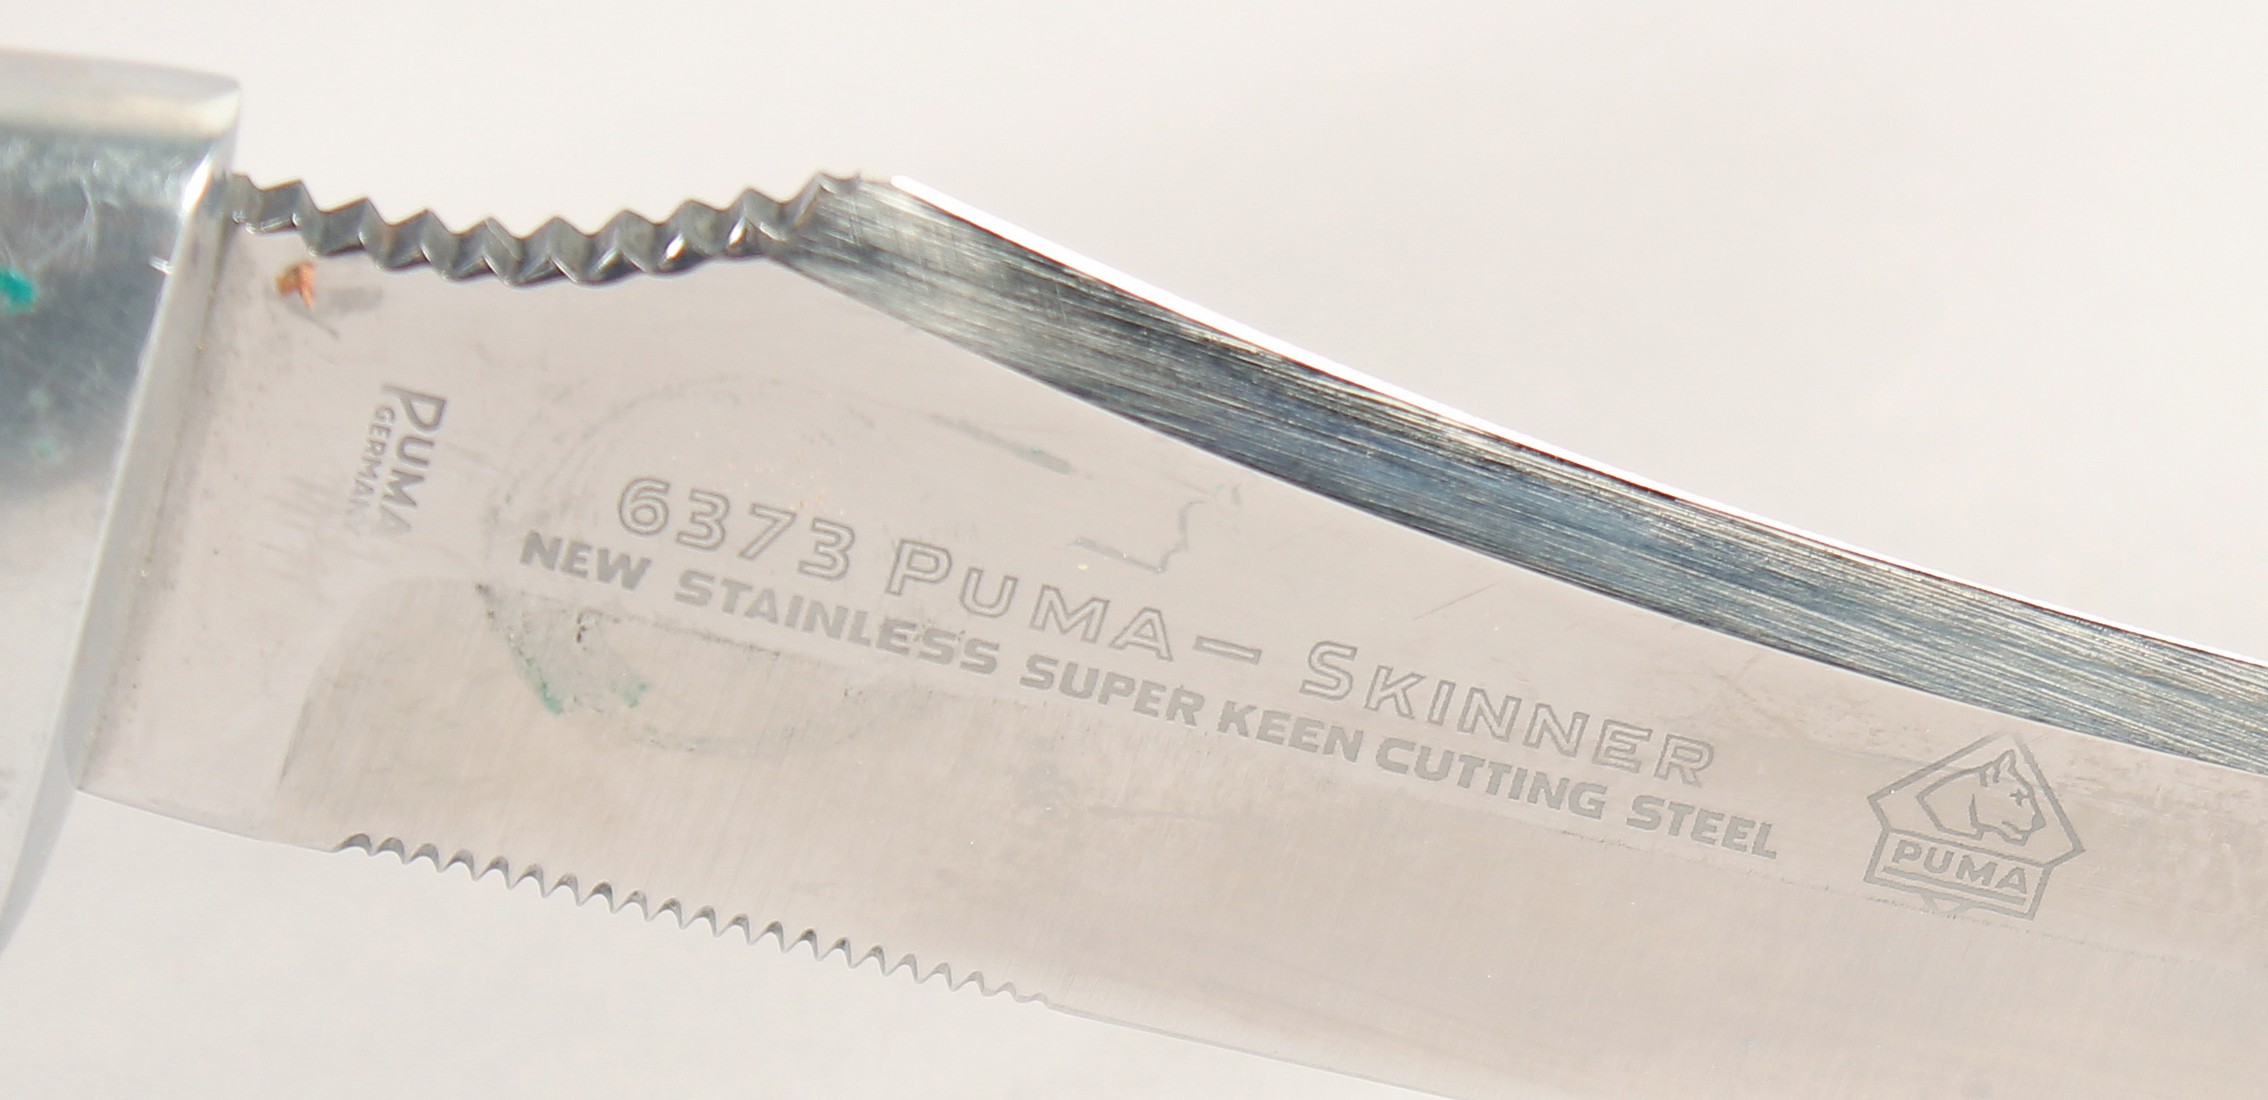 THE 637 PUMA-SKINNER KNIFE WITH SUPER KEEN CUTTING STEEL, with antler handle, in a leather sheath, - Image 3 of 5